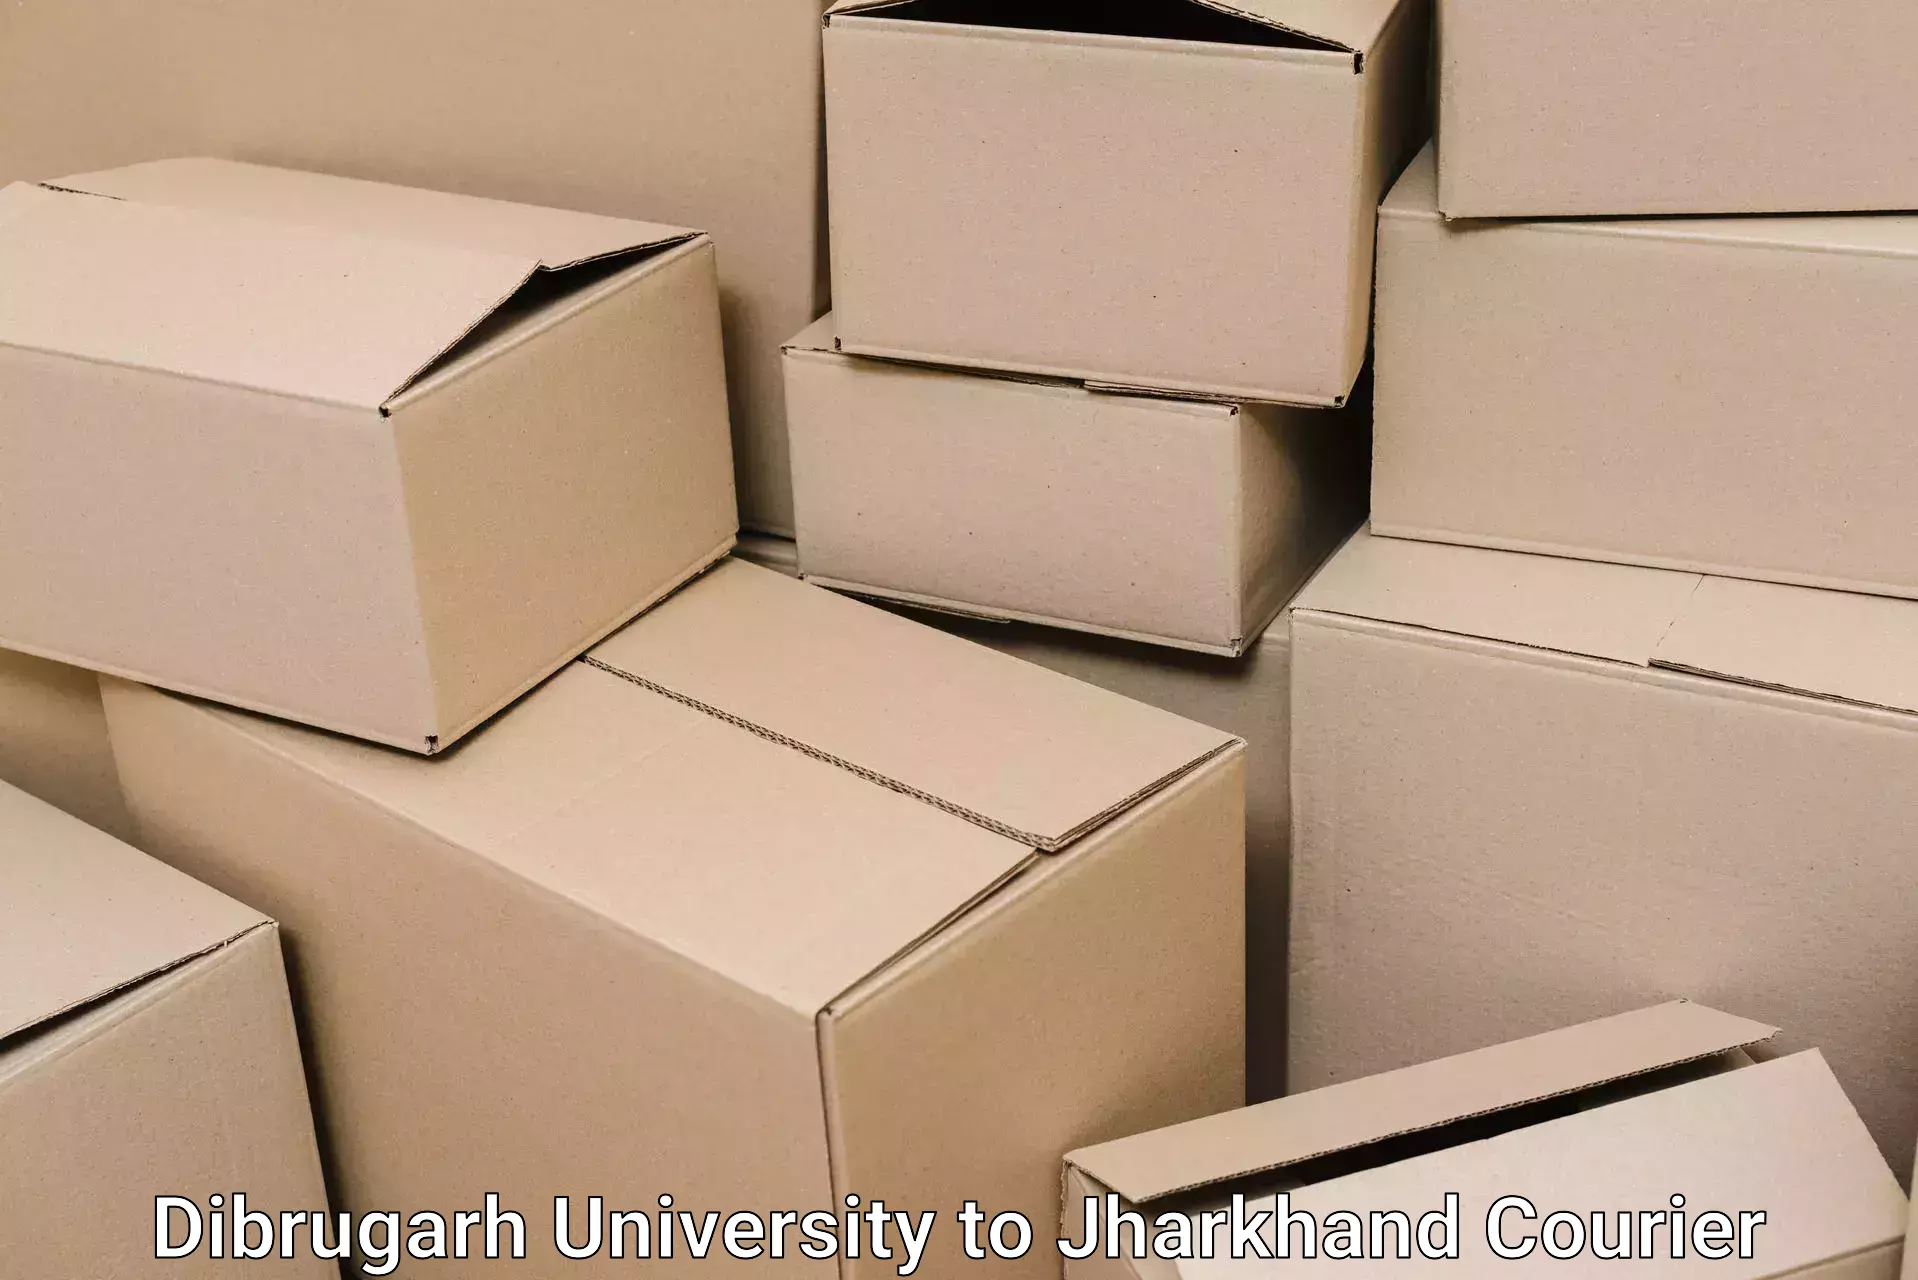 Professional movers and packers Dibrugarh University to Jharkhand